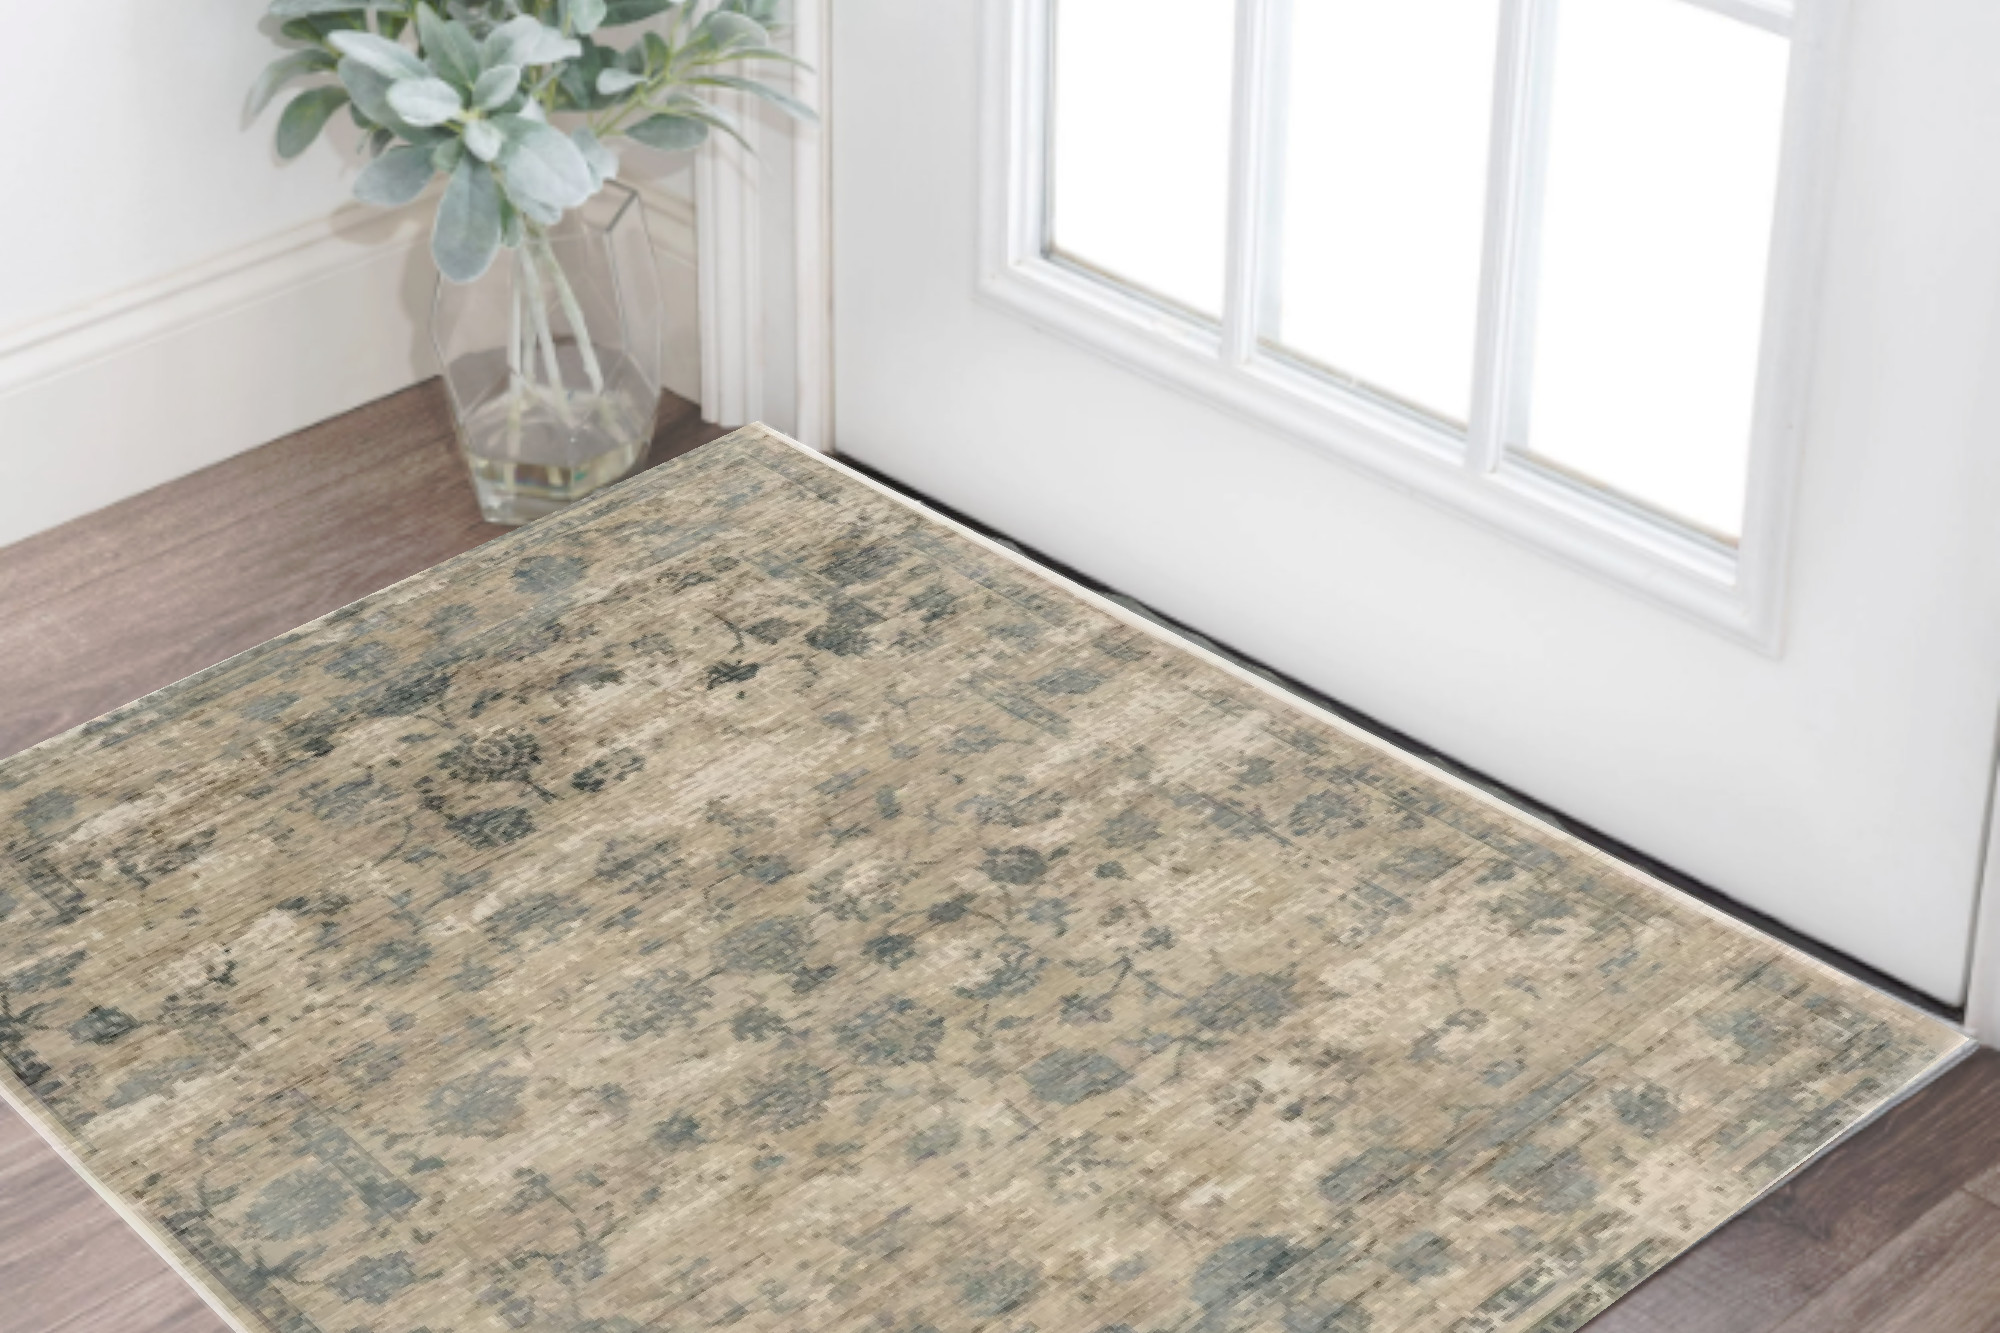 3' X 5' Beige and Blue Floral Area Rug-352900-1